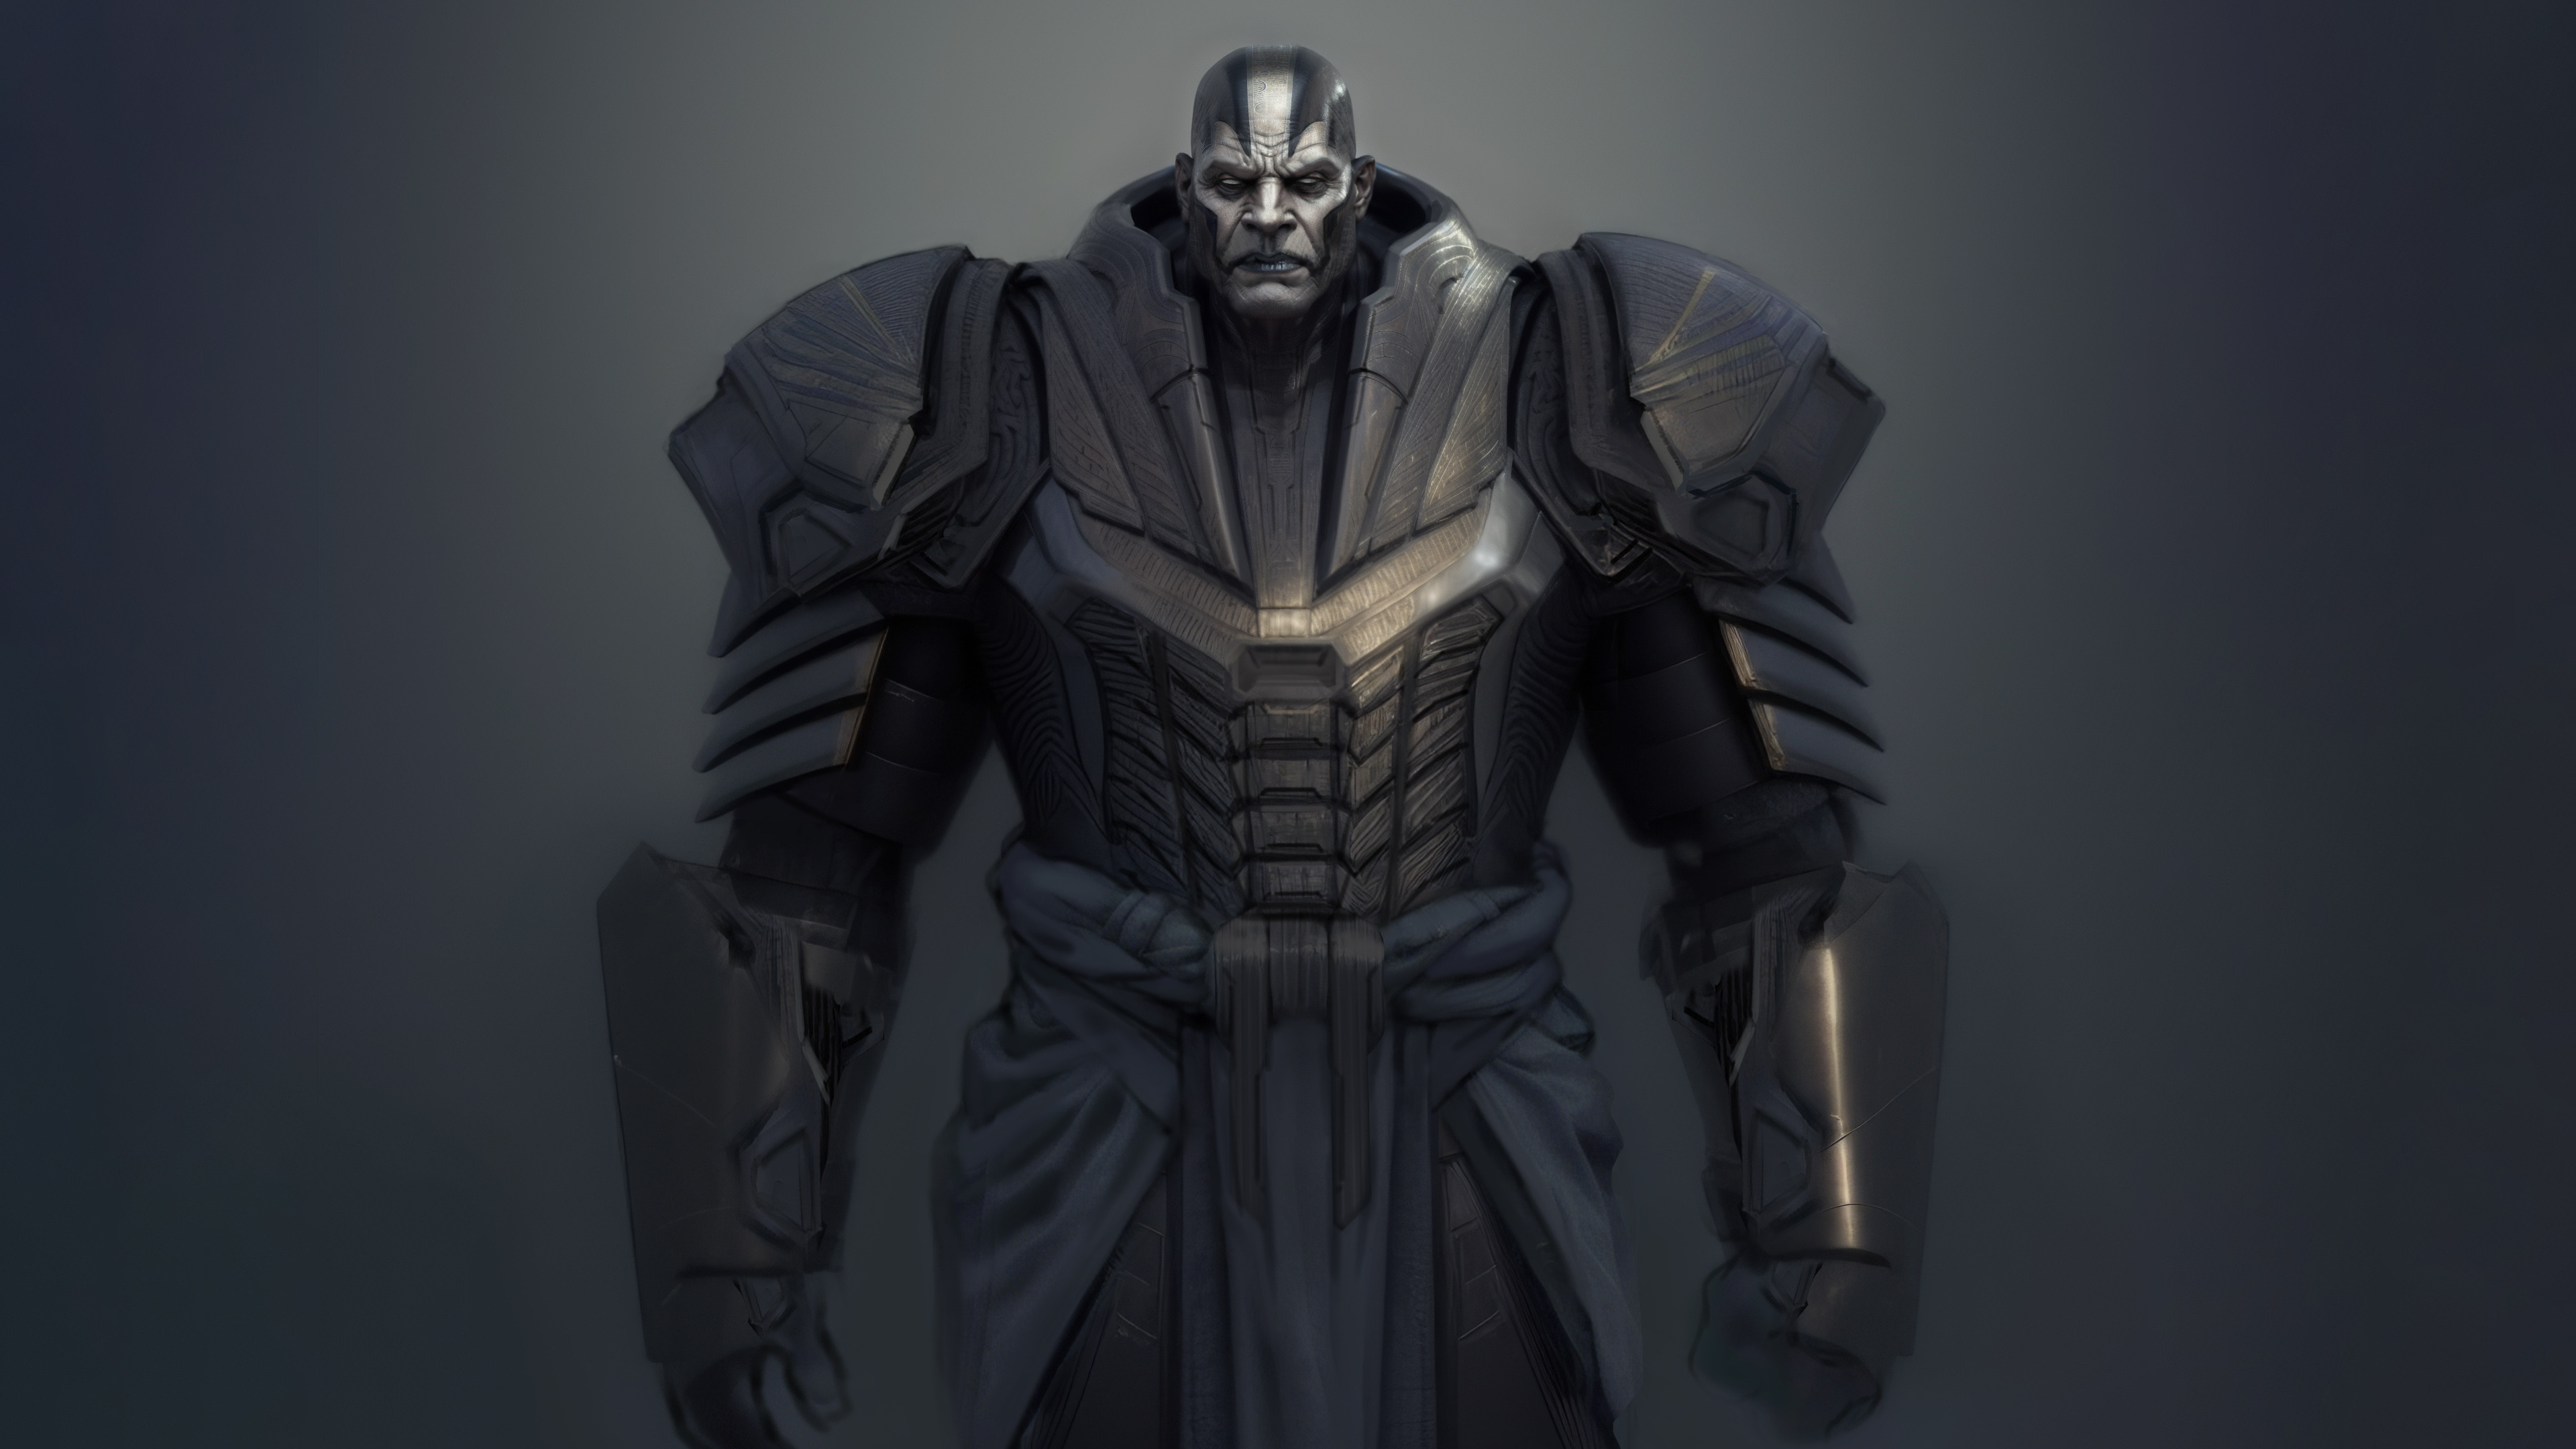 Apocalypse - an imposing, Thanos-level threat. Blending sci-fi and egyptian motifs into his iconic core design create a fresh and familiar look.